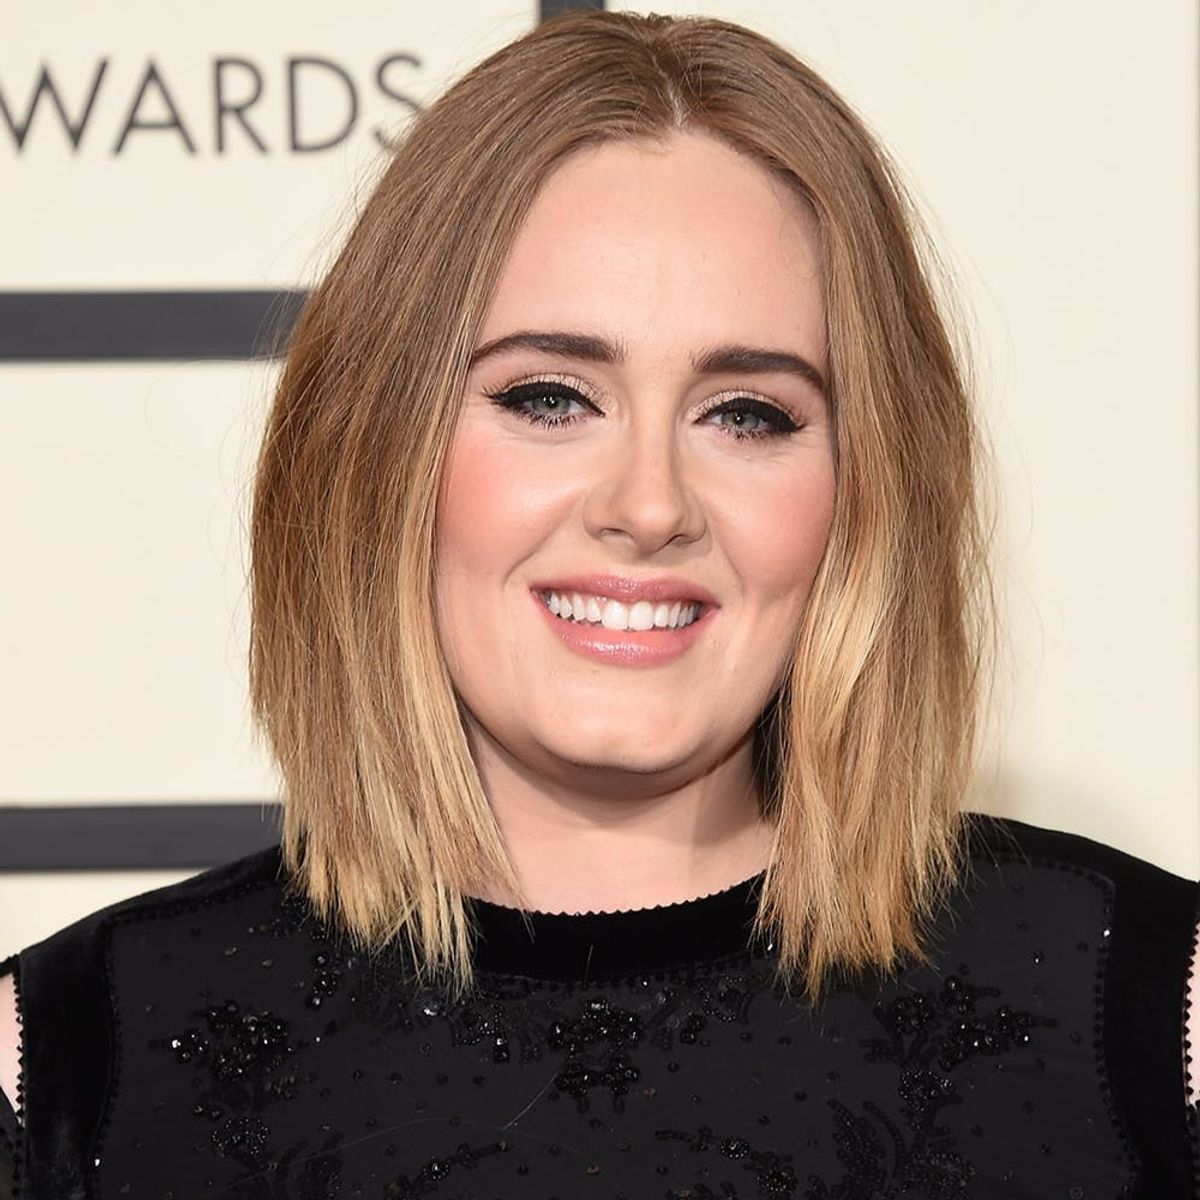 It’s Official: Adele Loves Coloring Books and Target Just as Much as You